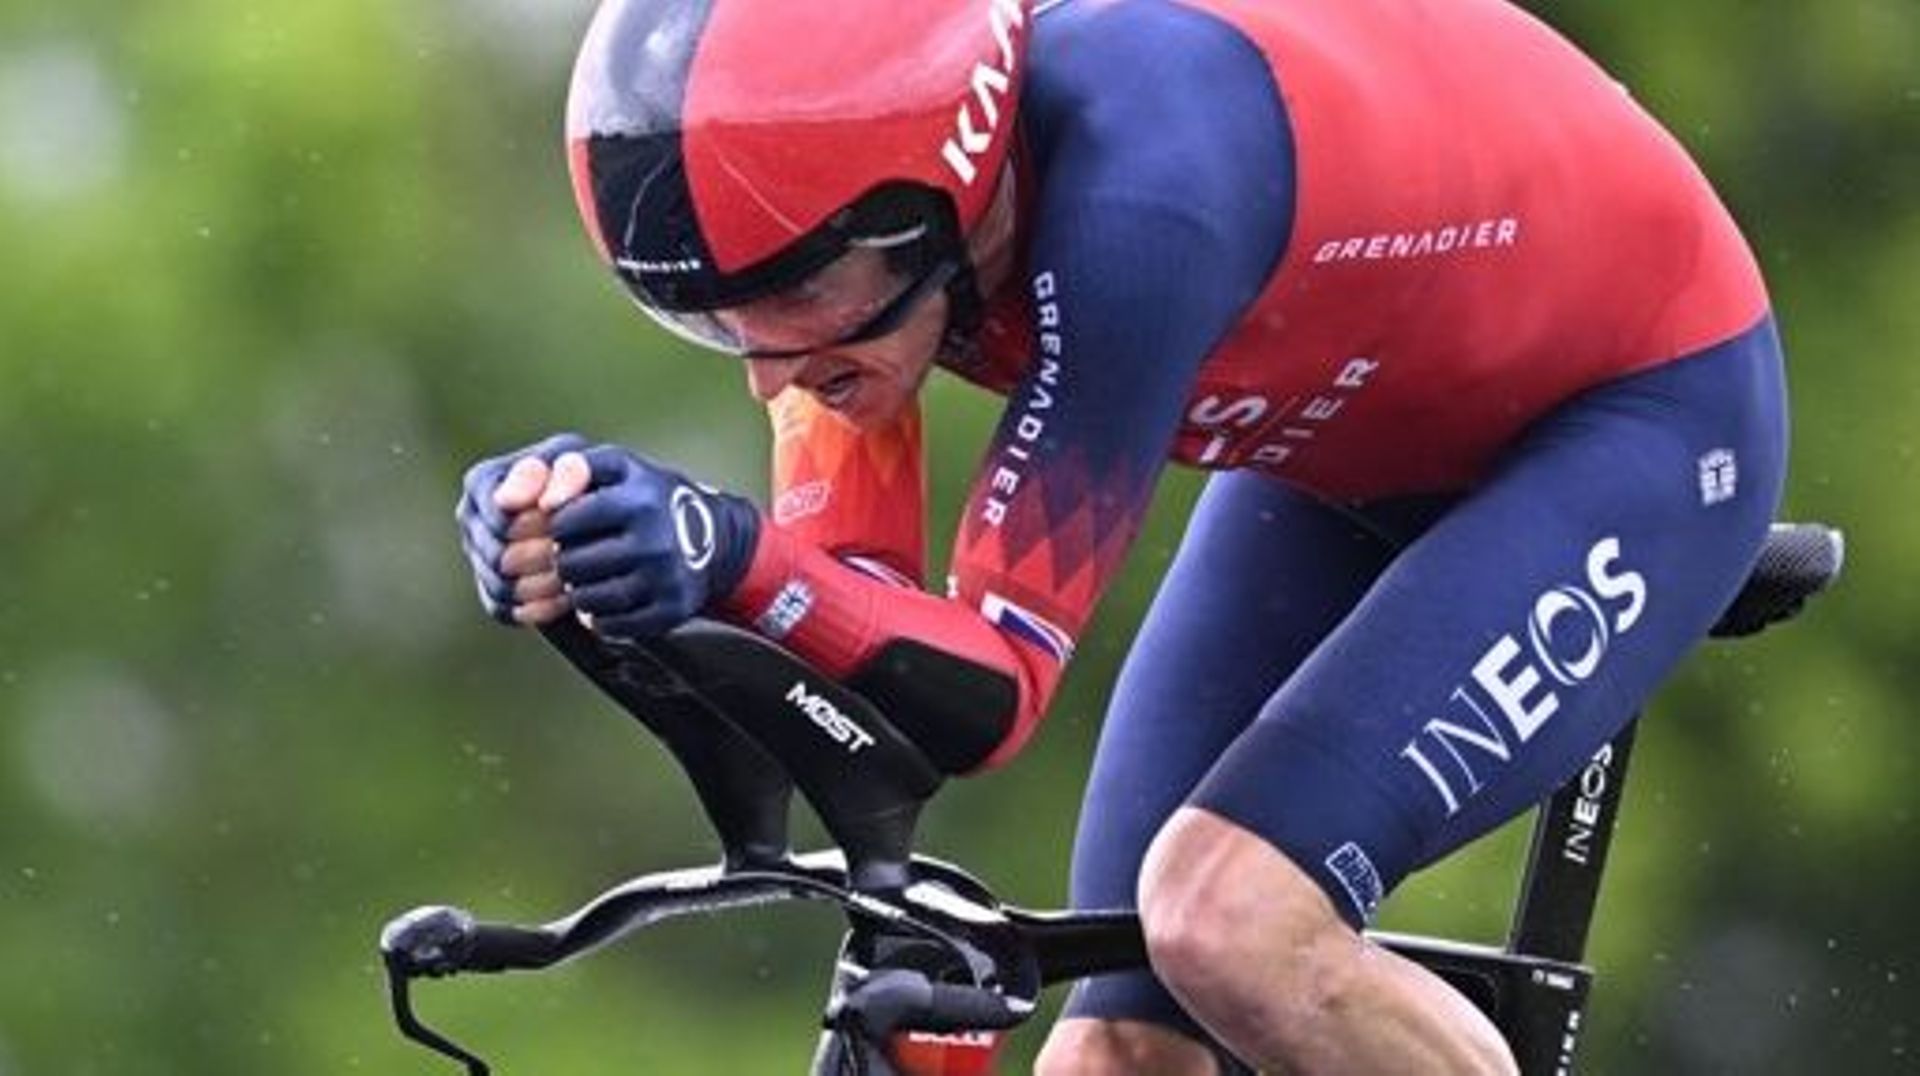 British Geraint Thomas of Ineos Grenadiers pictured in action during stage nine of the 2023 Giro D’Italia cycling race, an individual time trial from Savignano sul Rubicone to Cesena (35km), in Italy, Sunday 14 May 2023. The 2023 Giro takes place from 06